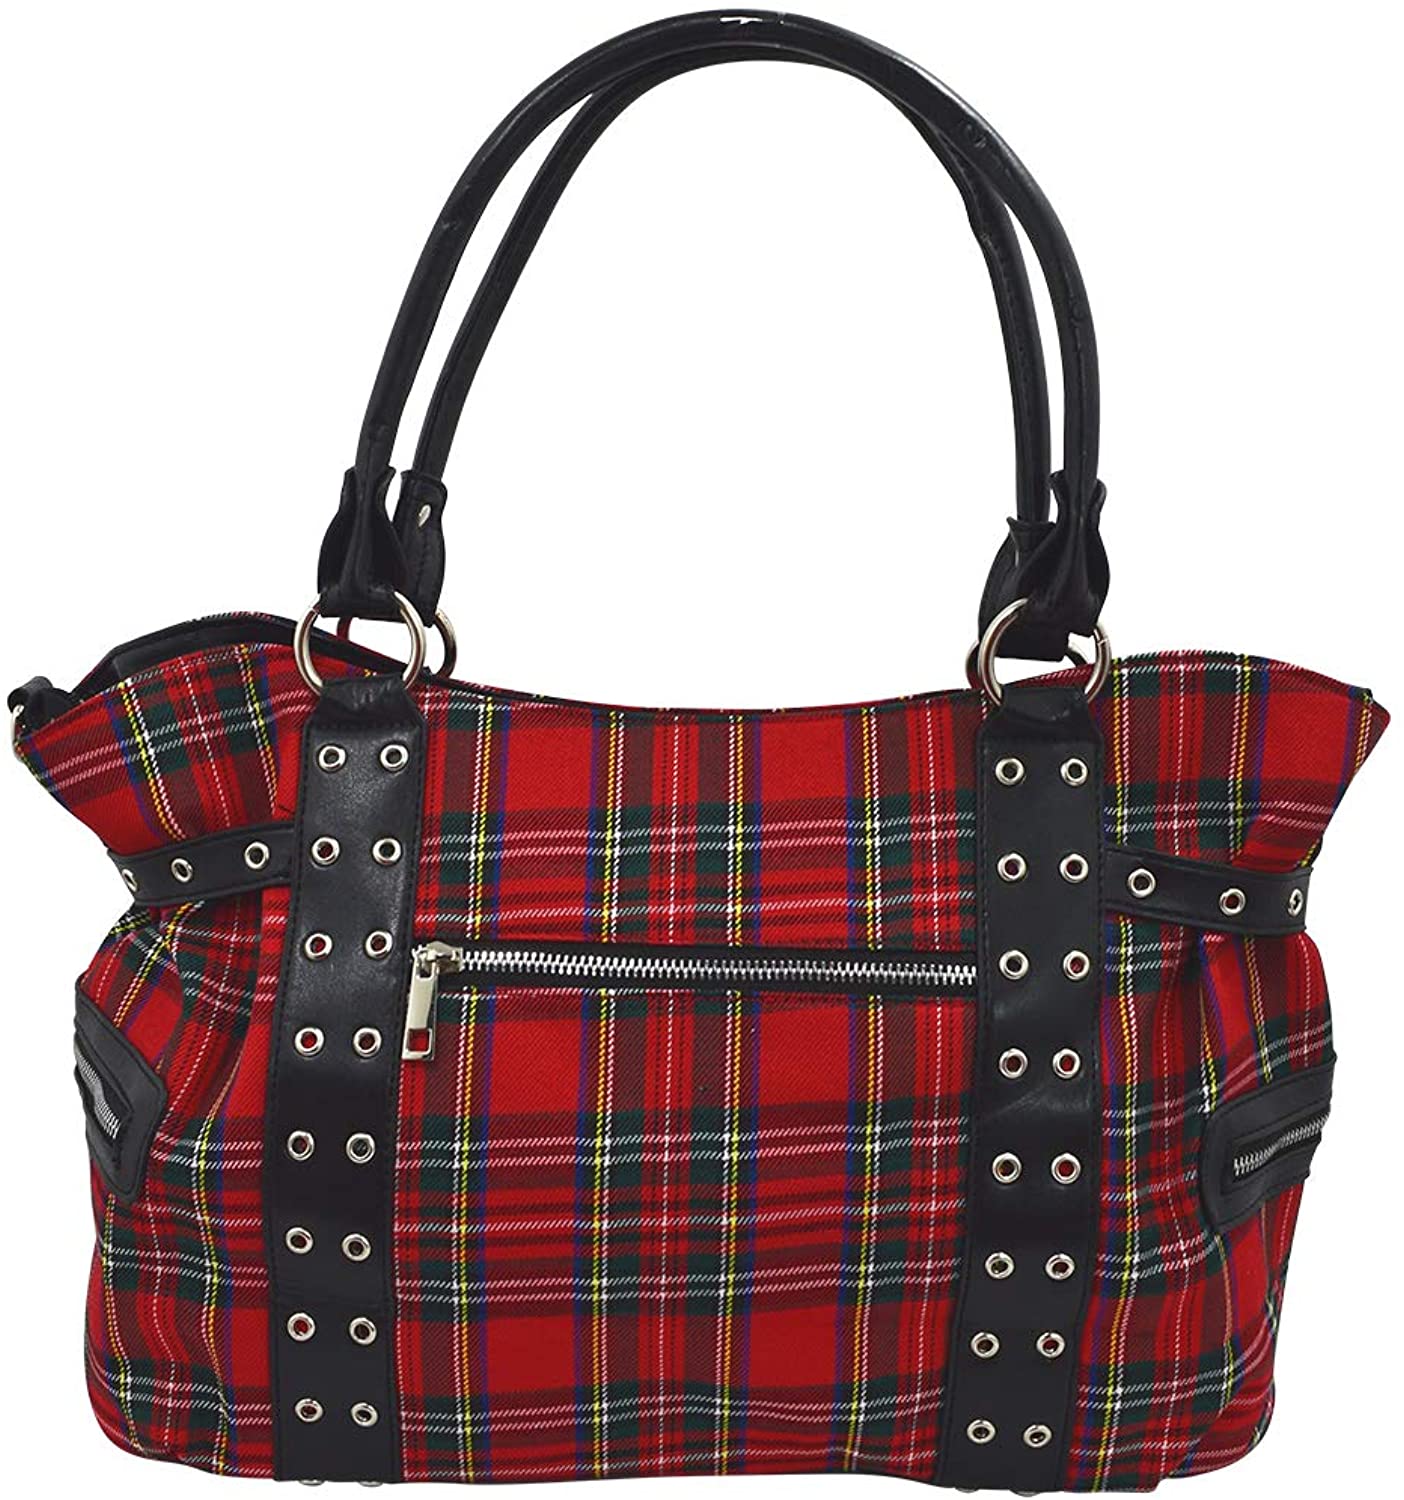 Buffalo Plaid Tote Bag Tweed Plaid Tote Bag Women Large Weekender Purse Red  Plaid Tote Bag With PU Handle DOM 108377 From 9,84 € | DHgate